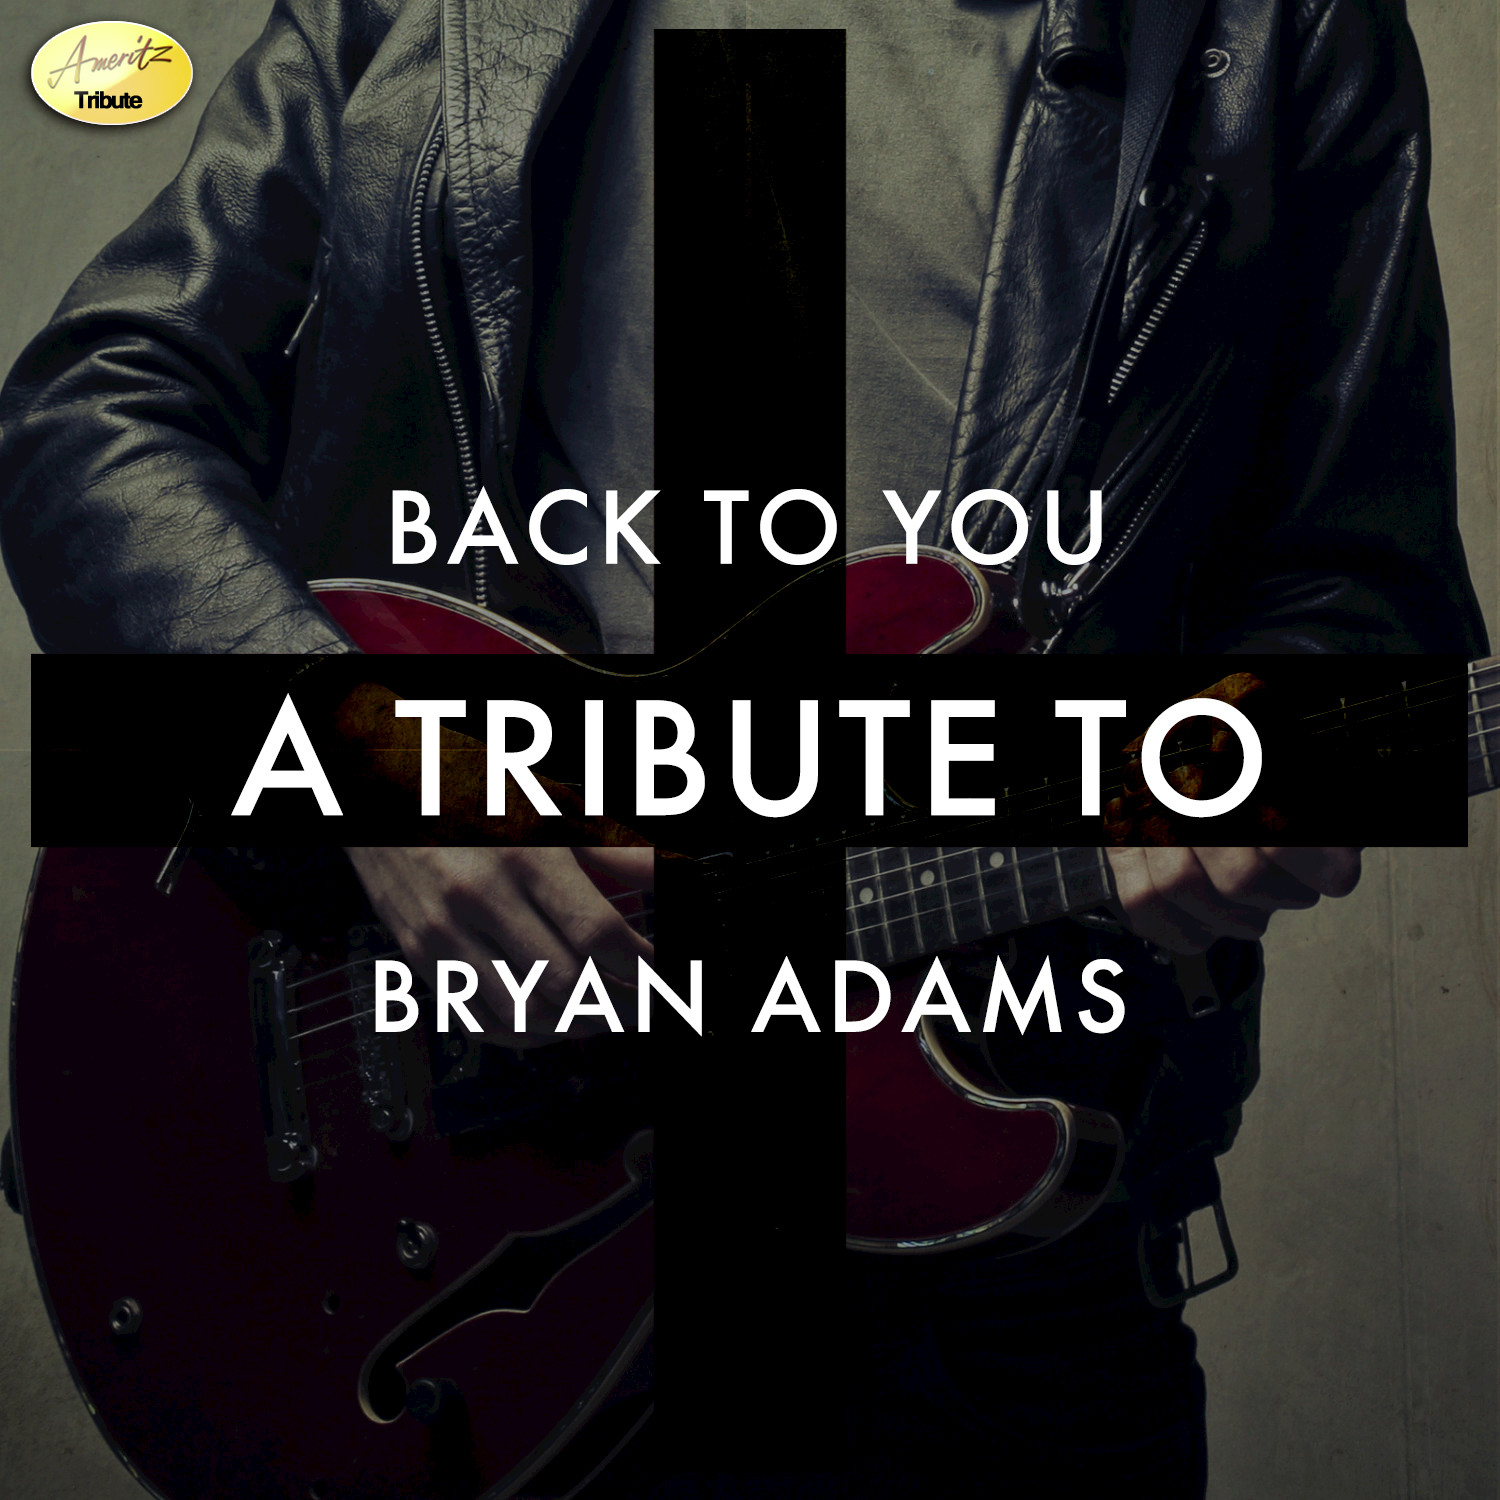 Back to You - A Tribute to Brian Adams